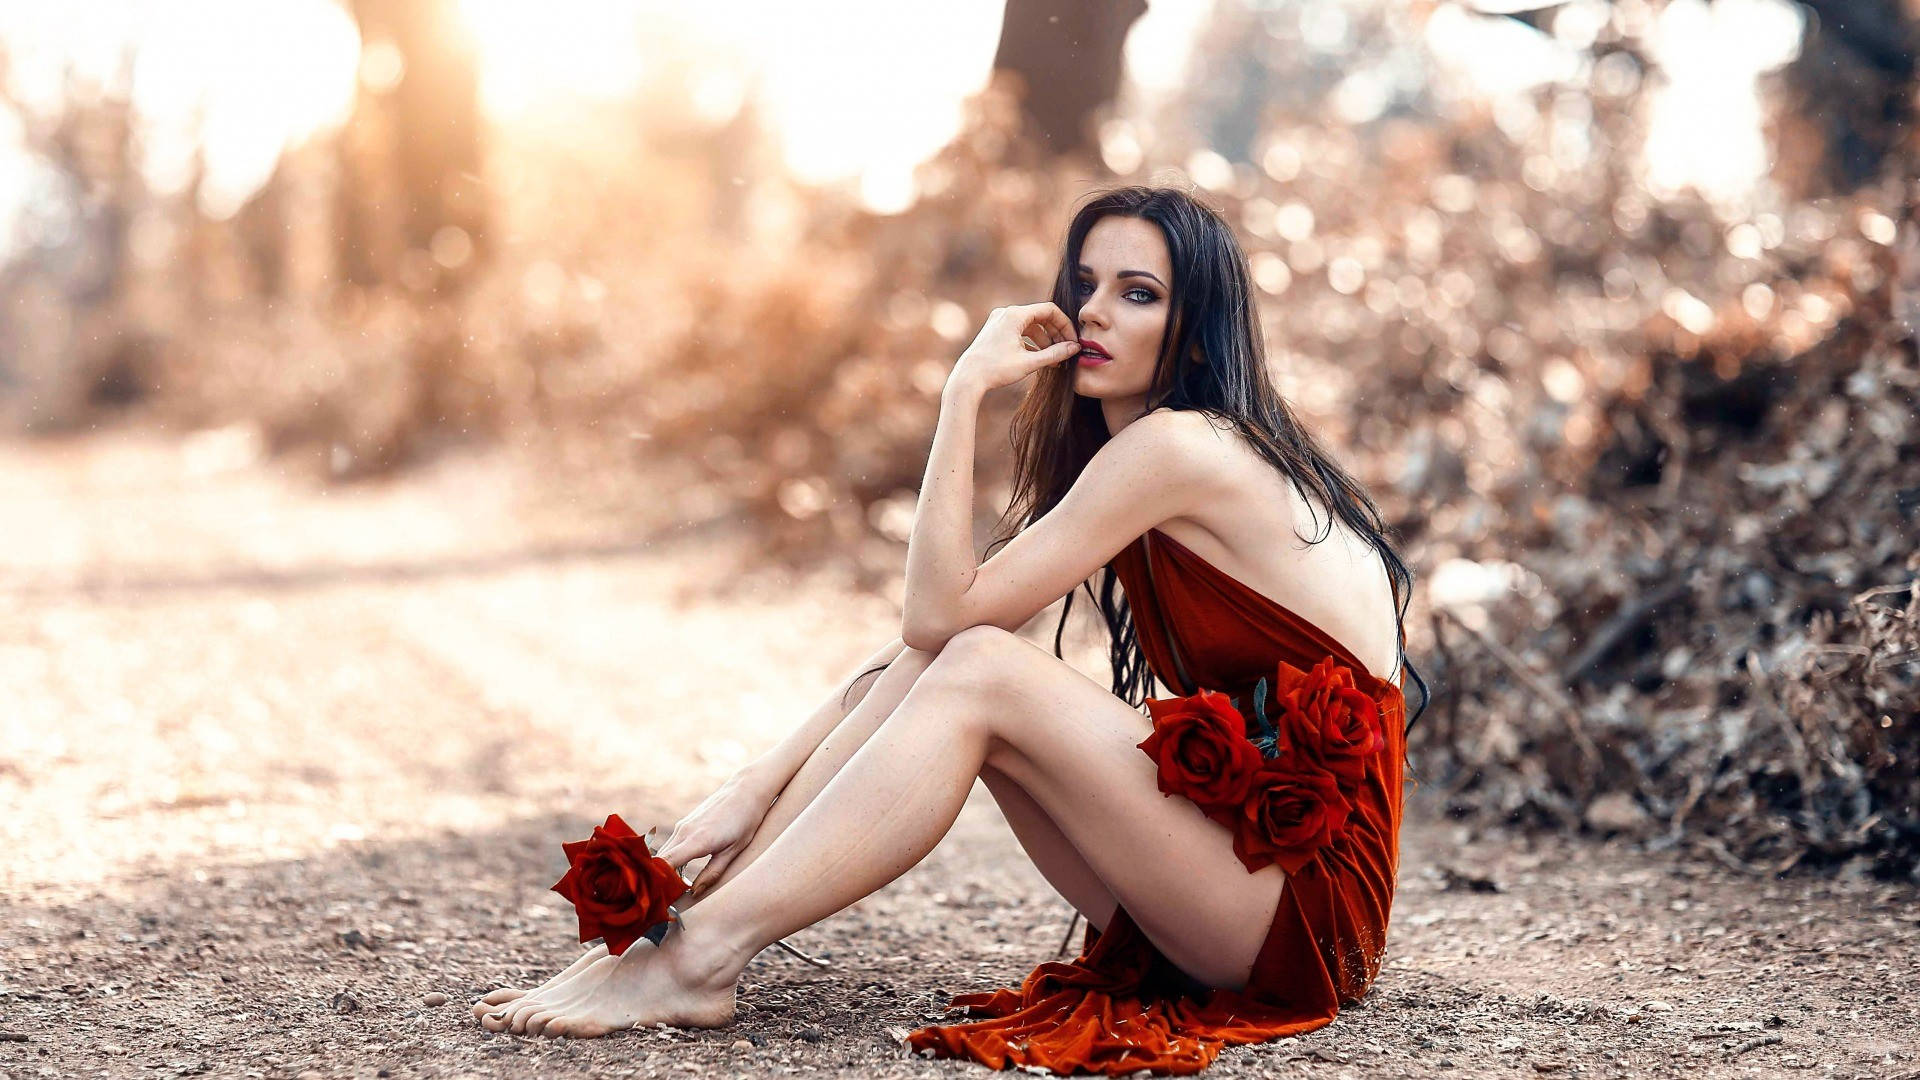 Beautiful Legs And Nature Fashion Photography Picture